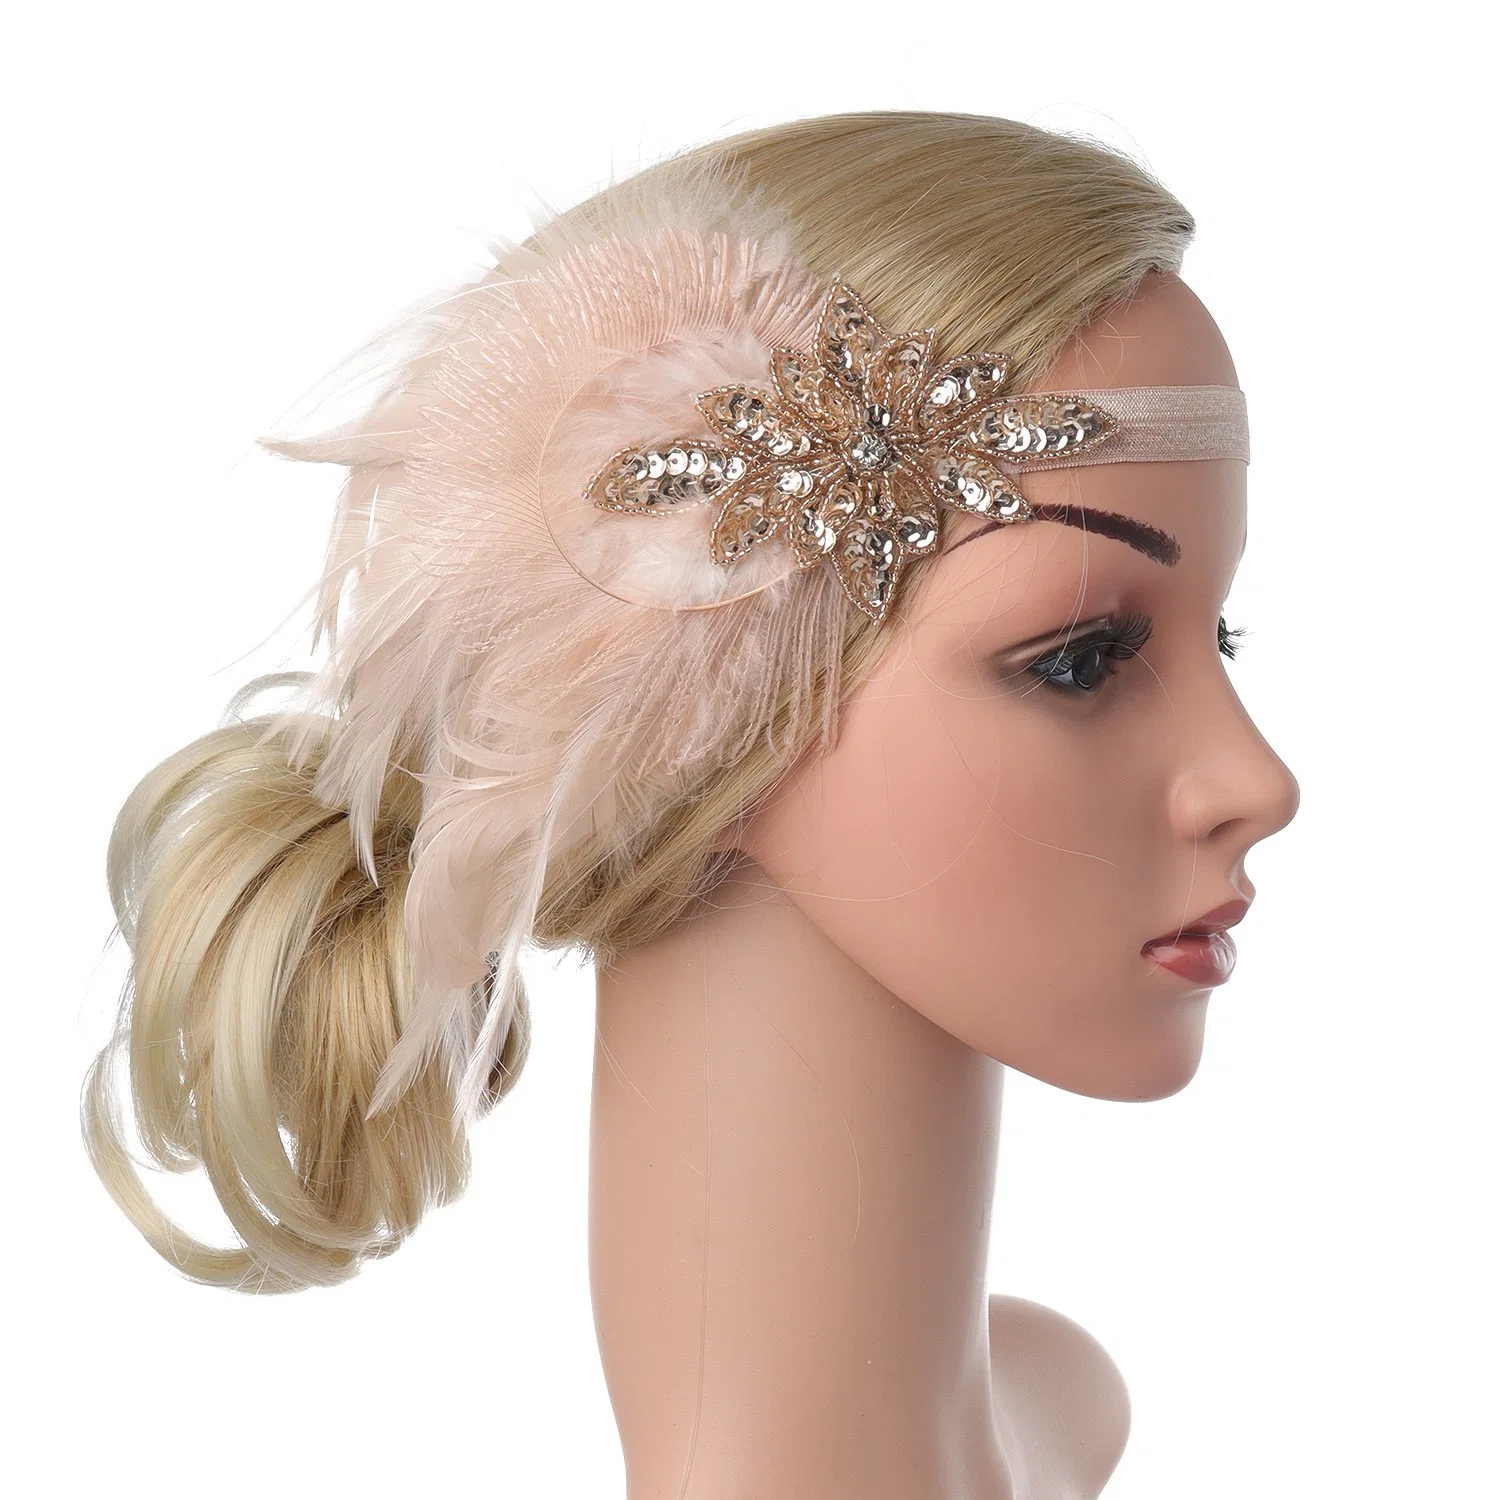 Headpiece Great Gatsby Inspired Cocktail Party Rhinestone Hair Accessories Fascinators Feather Headband for Women